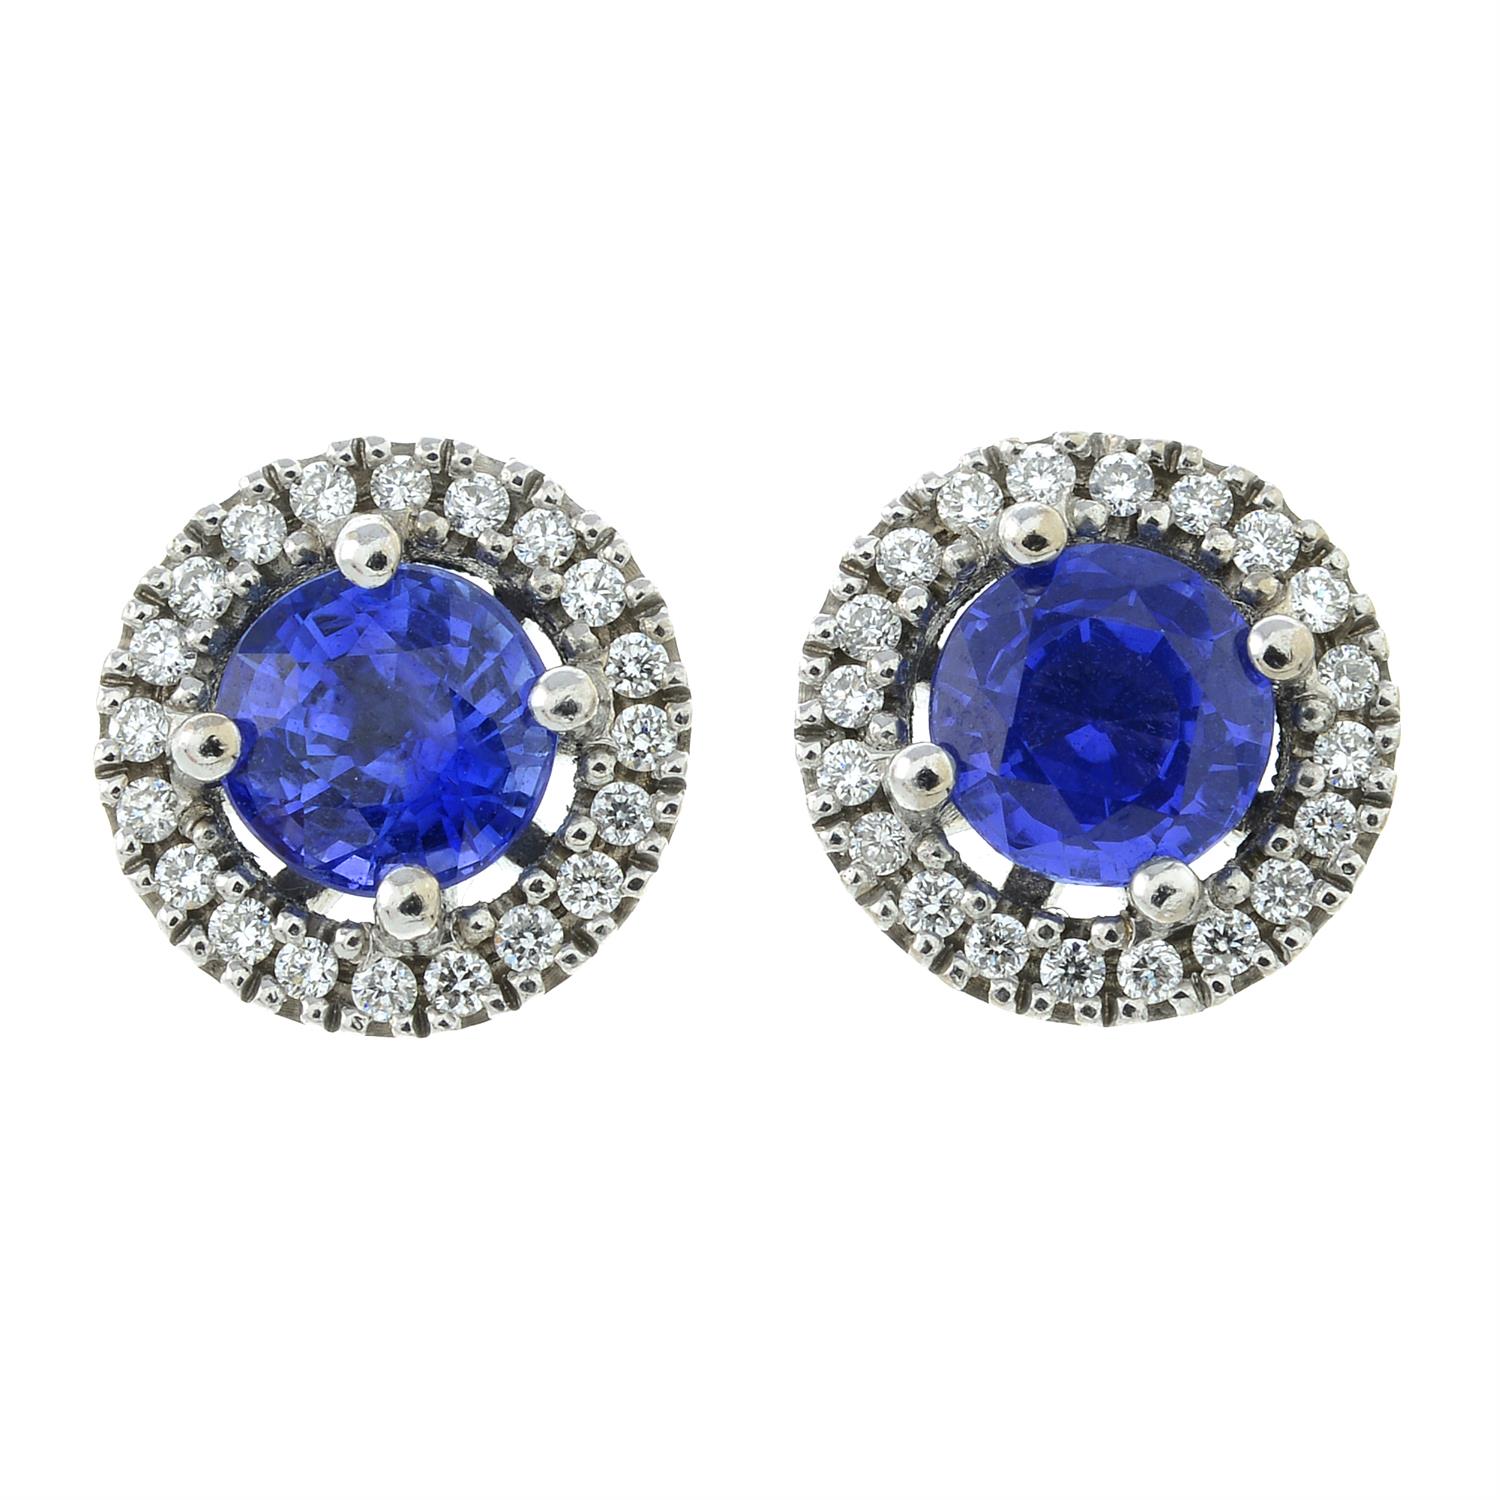 A pair of 18ct gold sapphire and brilliant-cut diamnd cluster stud earrings.